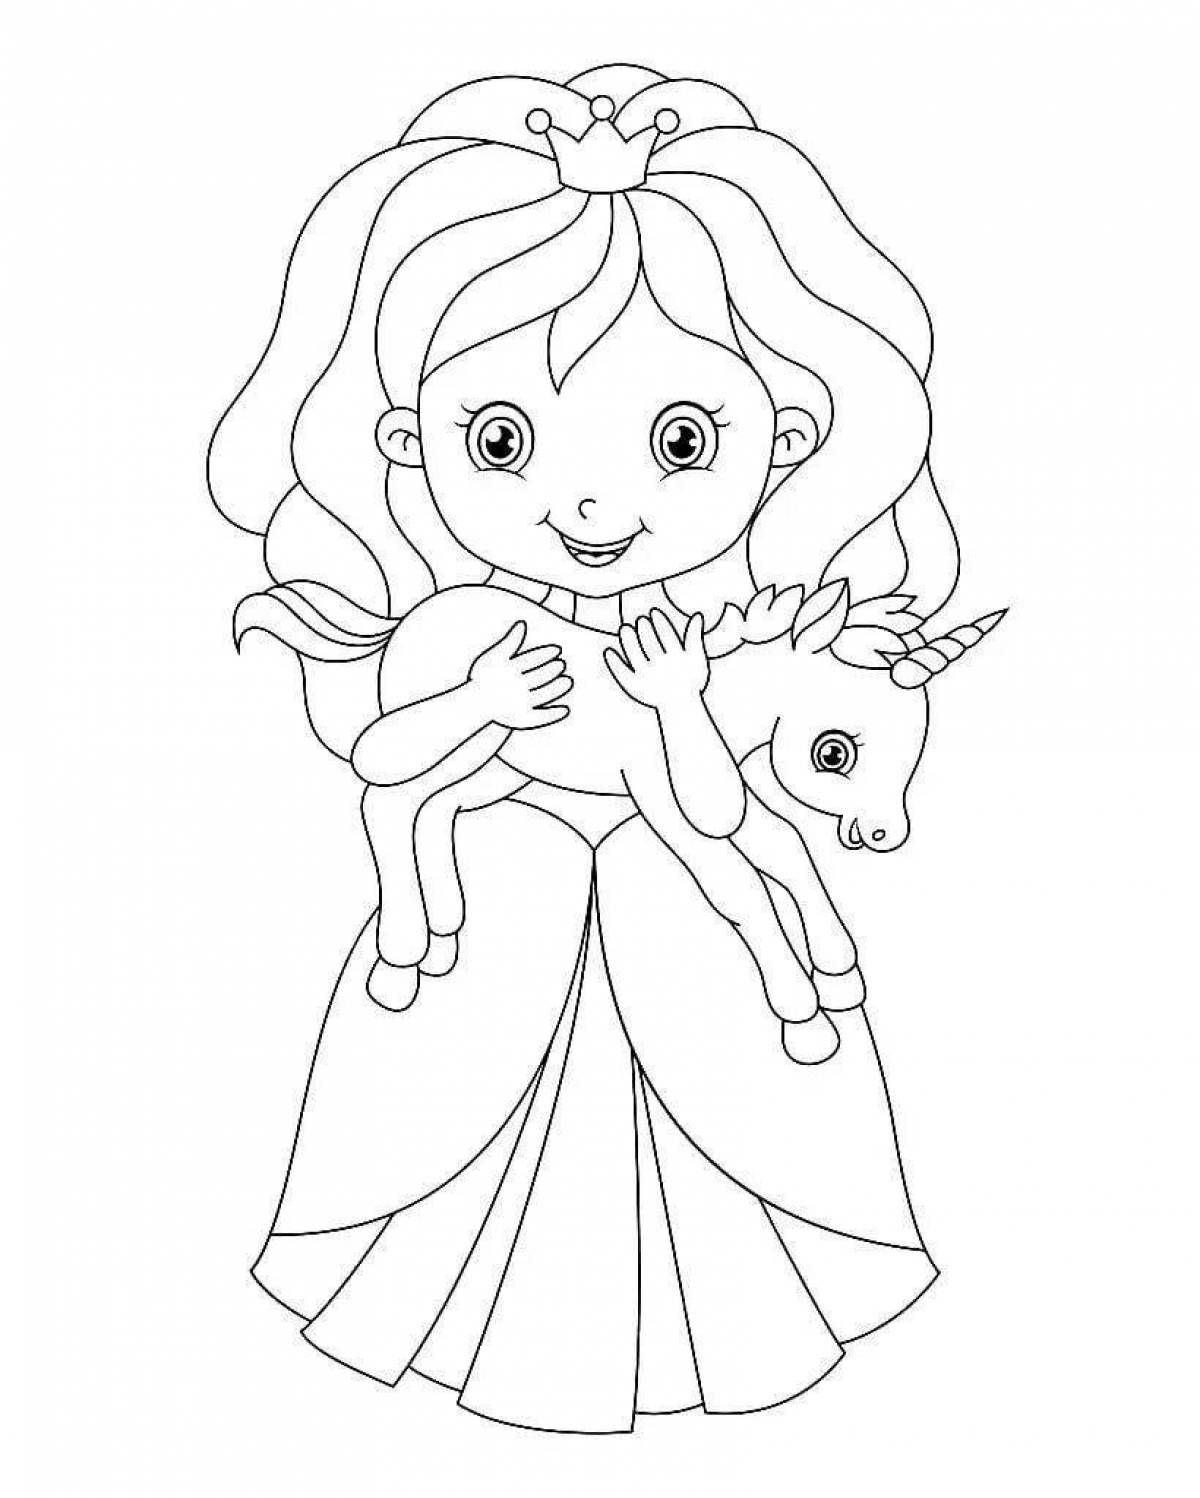 Brilliant coloring page 4 for girls